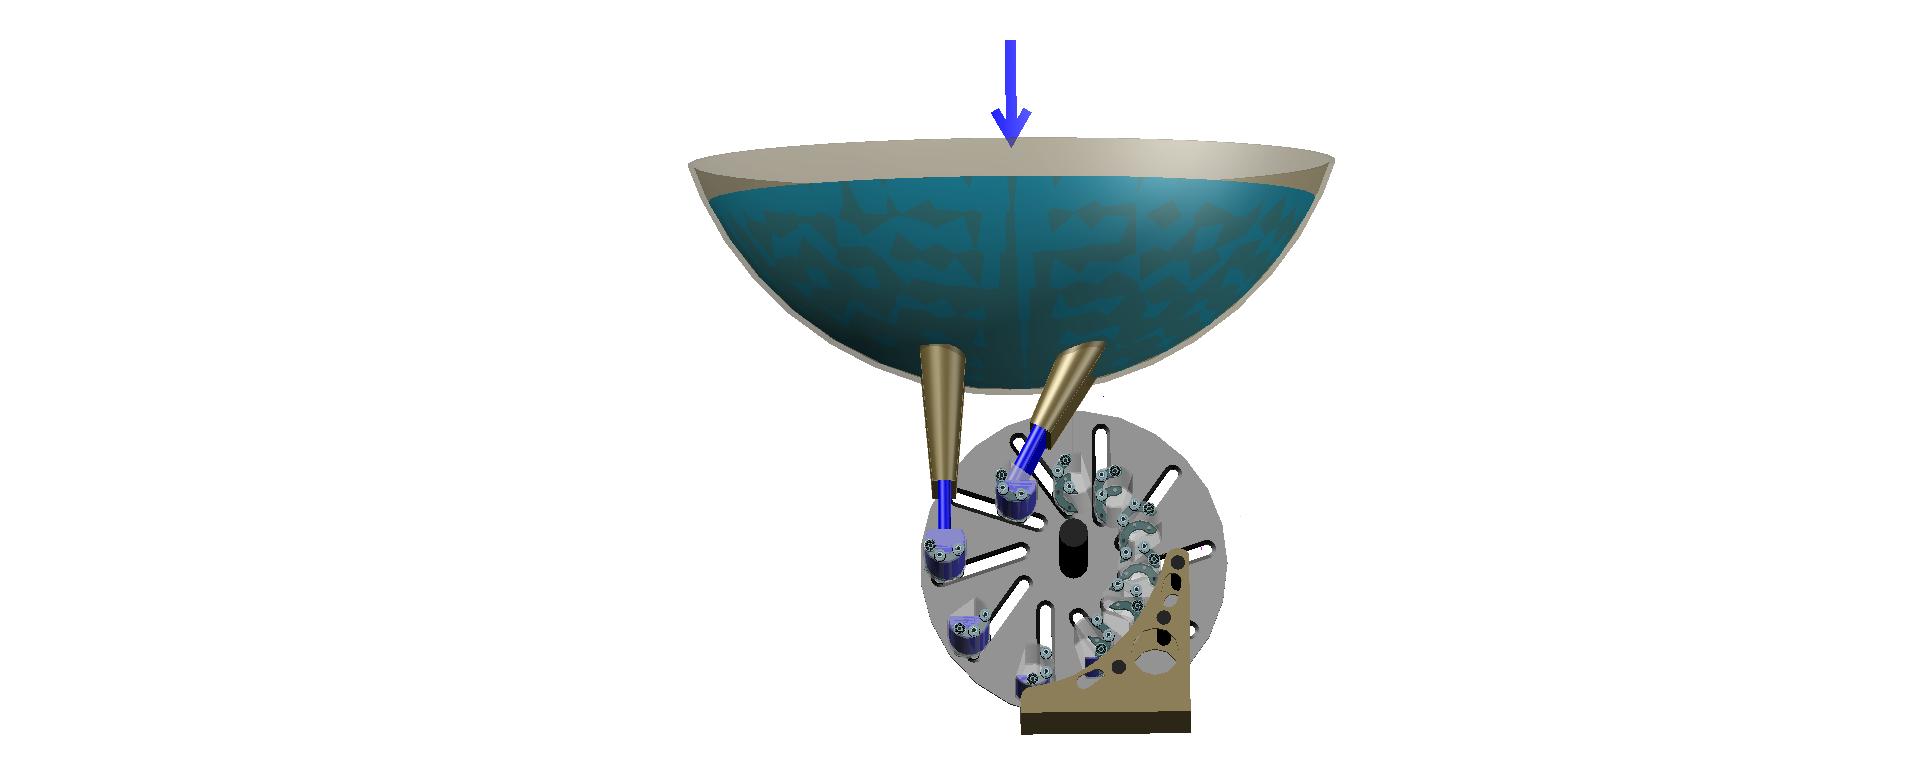 The appearance variant of design motor rotor (without the front disk), equipped by hollow movable blades, which is under the impact of the water pressure coming from the two nozzles.